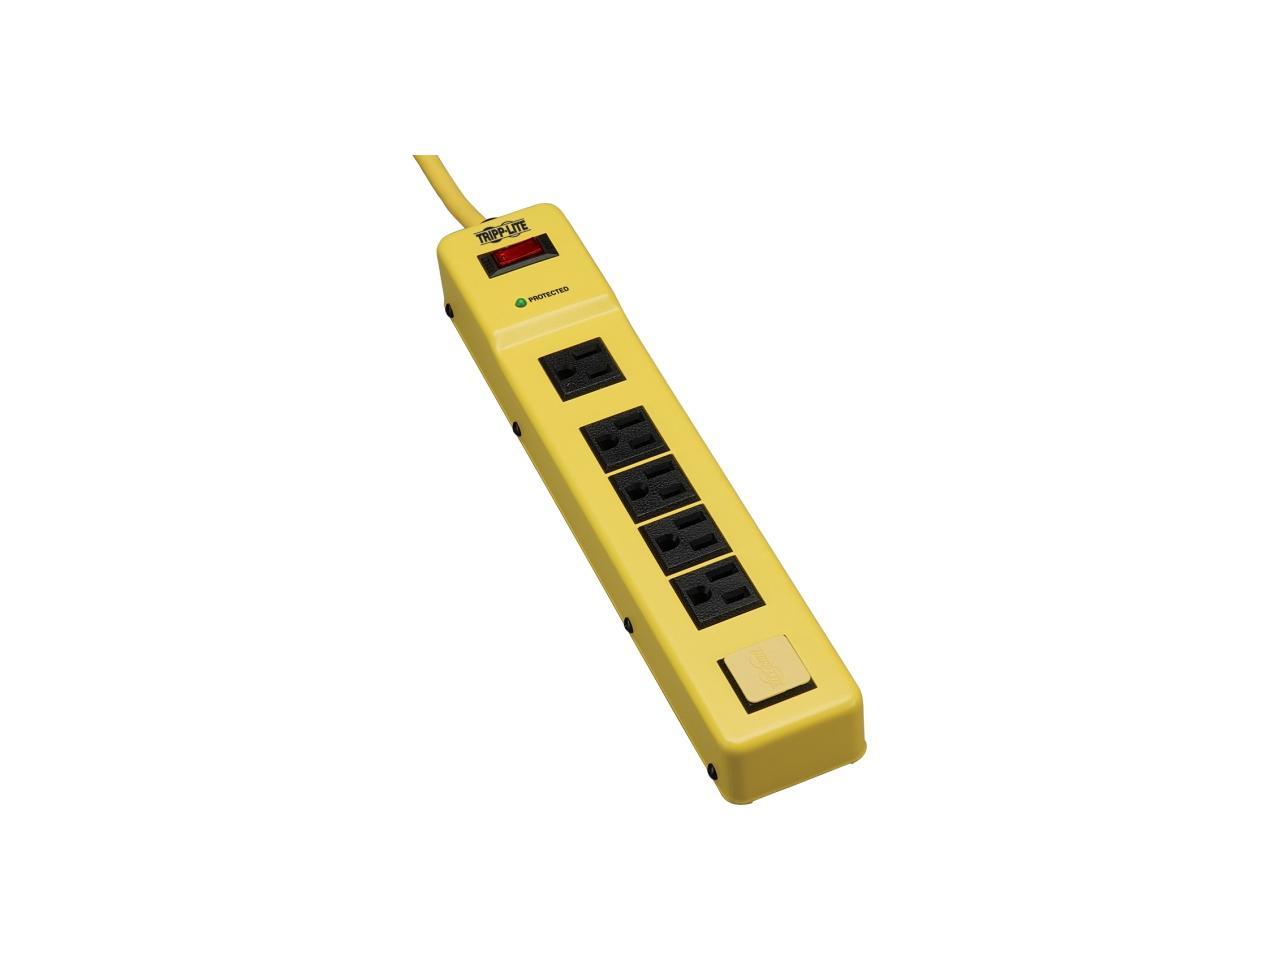 TRIPP LITE TLM626SA 6 Feet 6 Outlets 900 Joules Safety Surge Suppressor